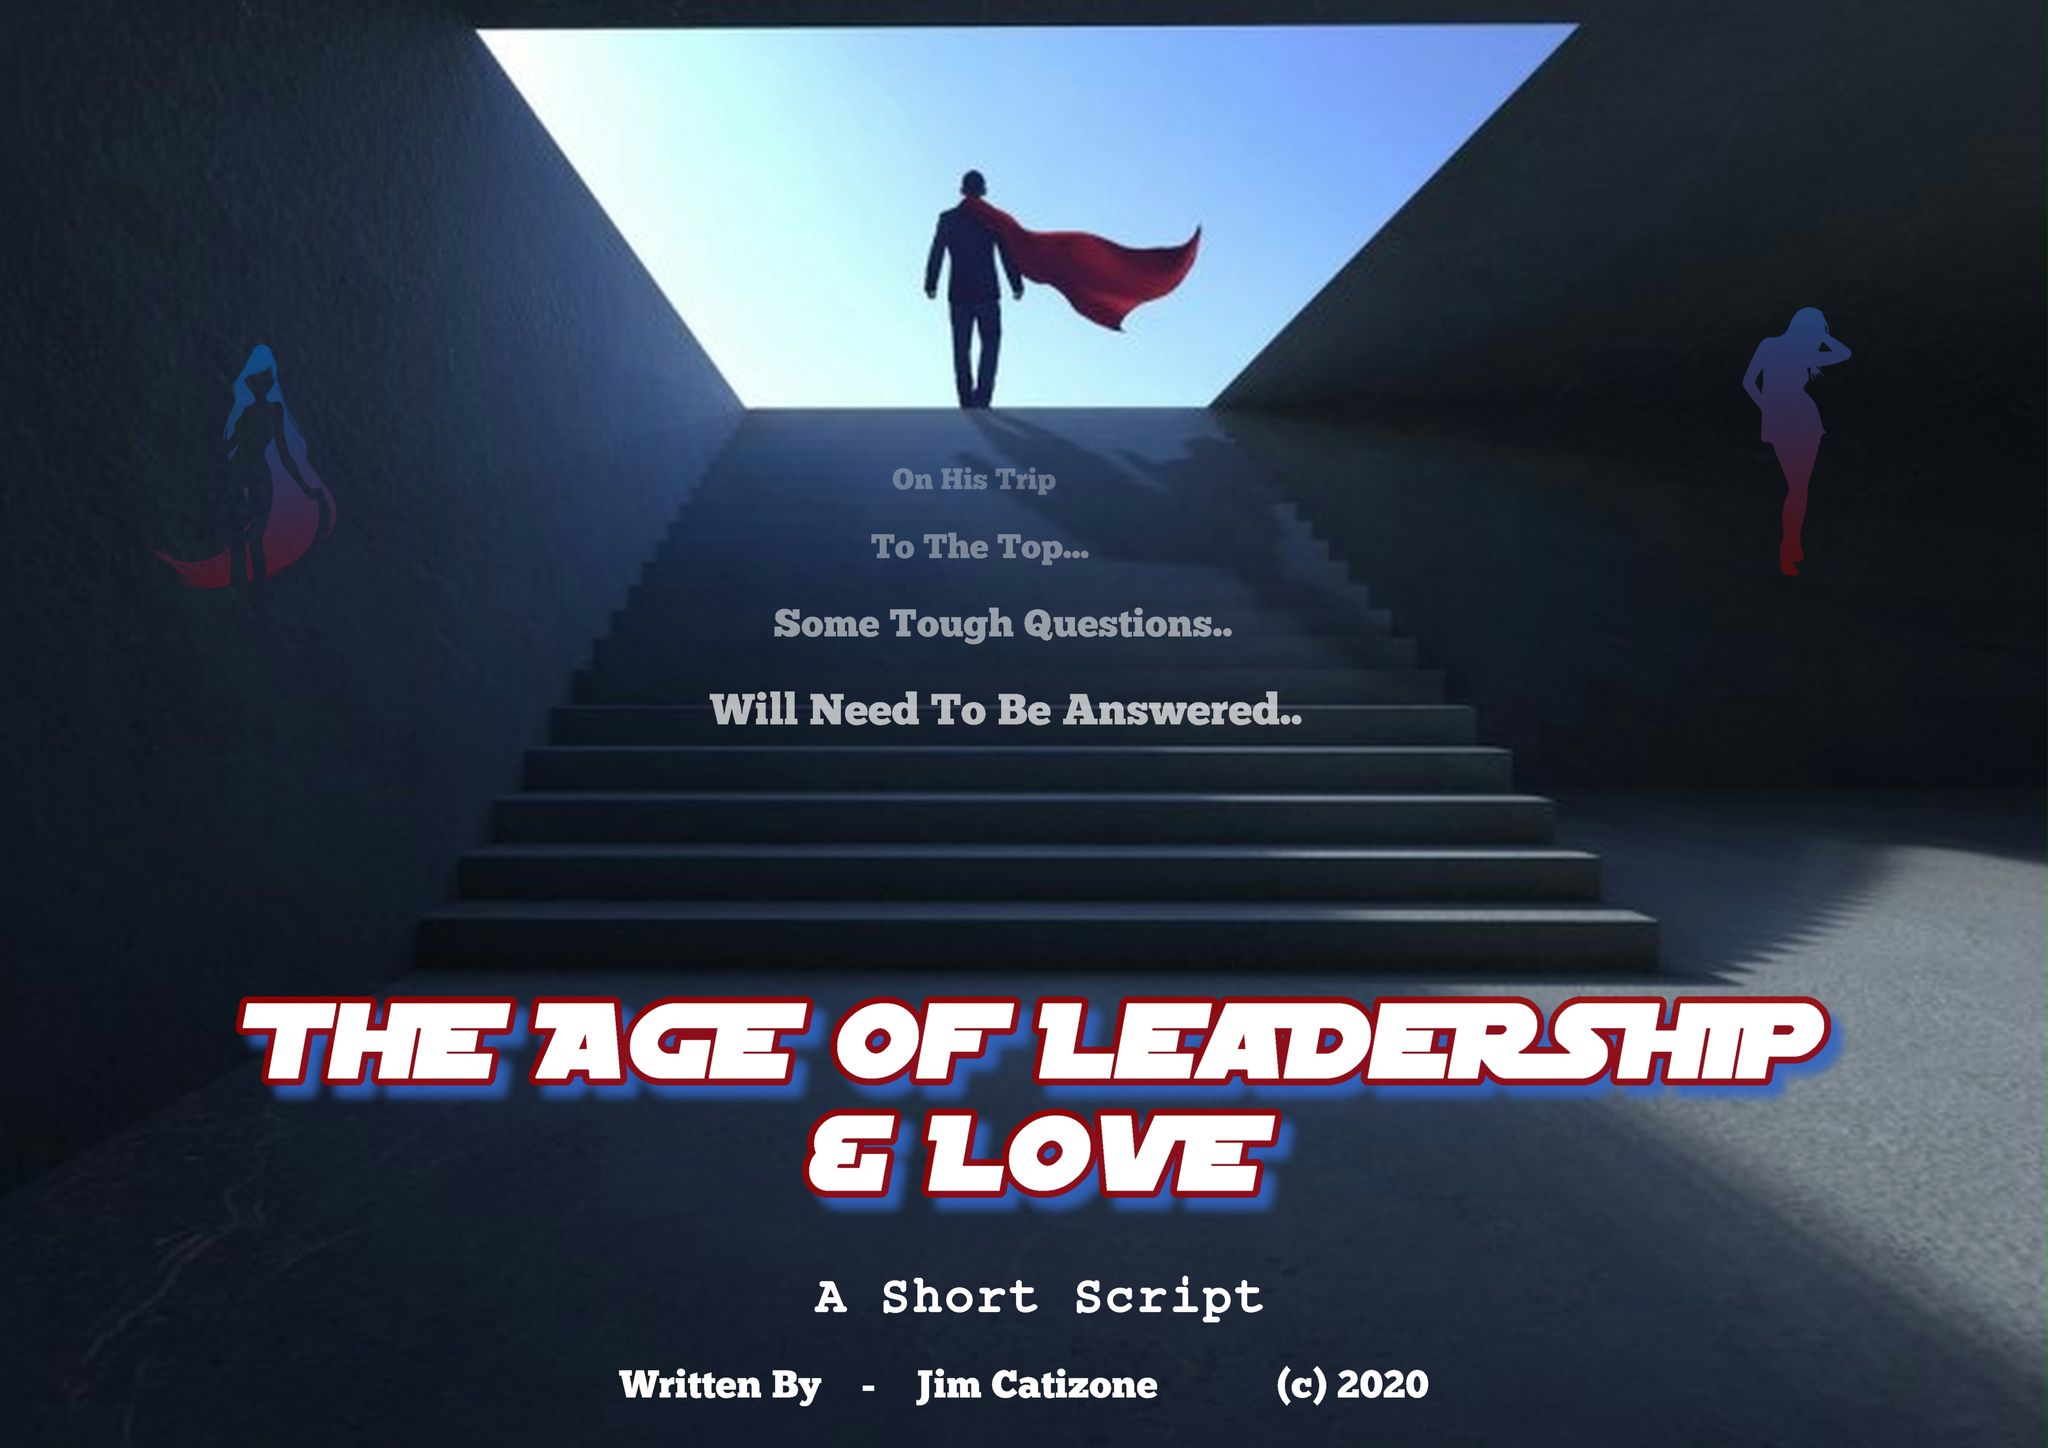 THE AGE OF LEADERSHIP & LOVE